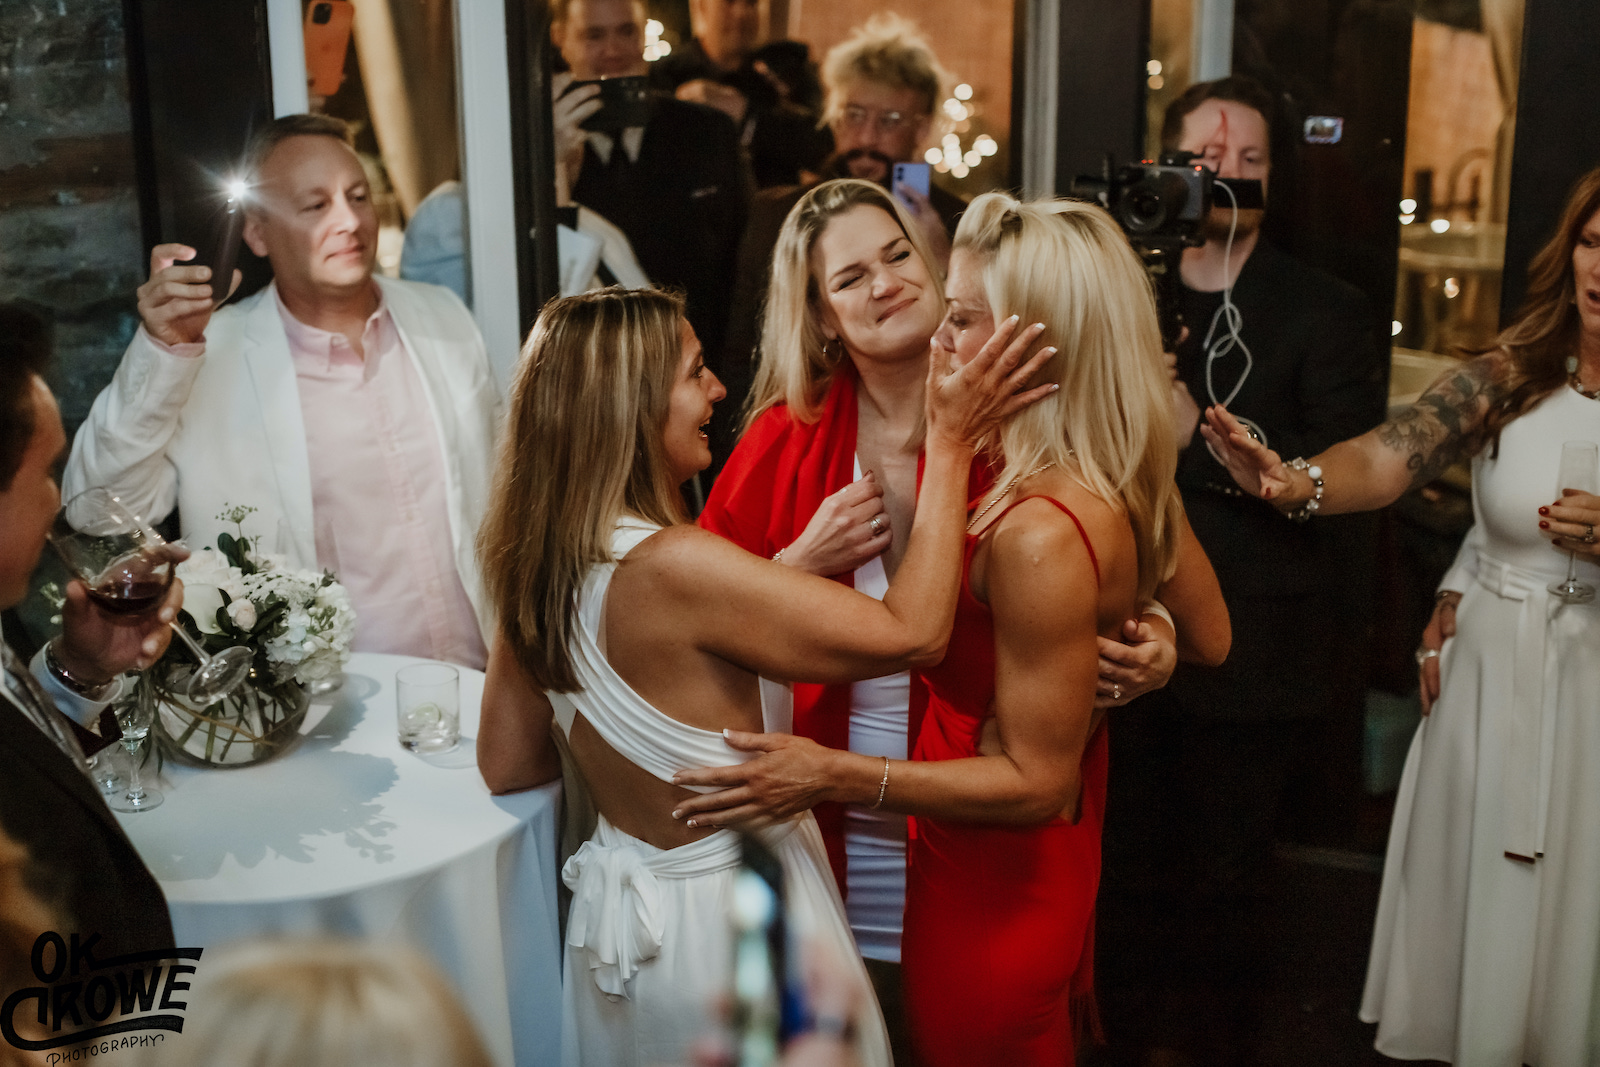 Payge McMahon Page's friends congratulate her after her surprise proposal to Diamond Dallas Page